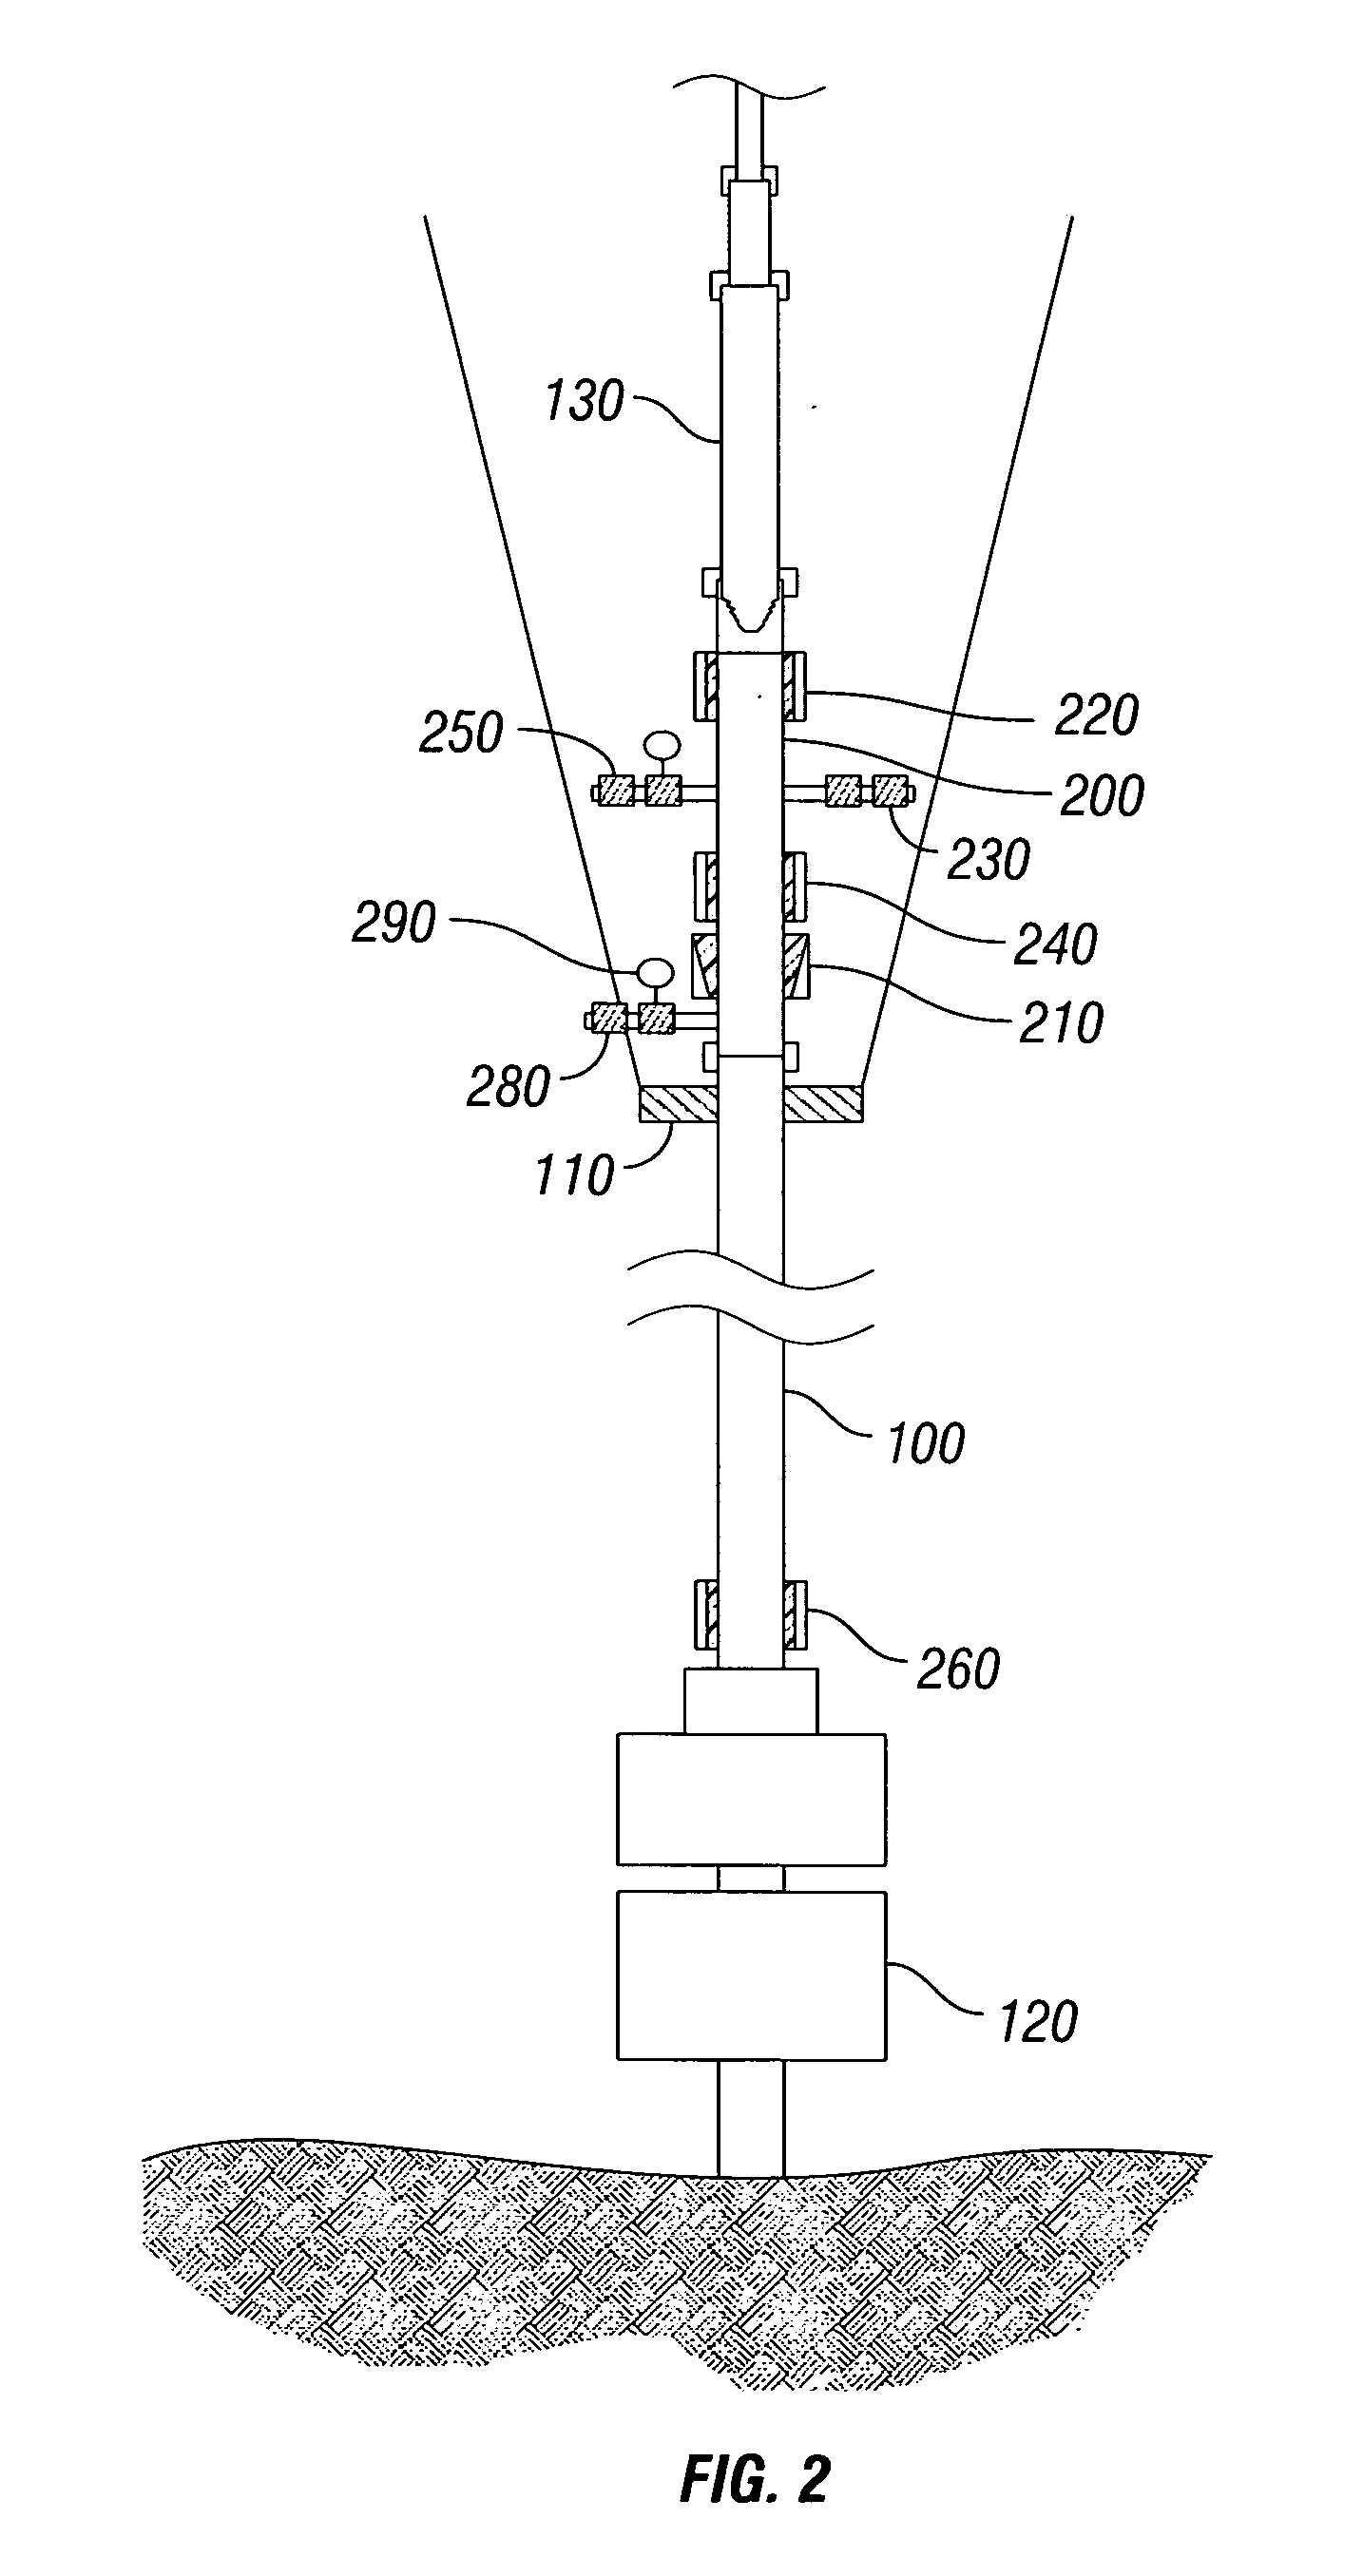 Apparatus and method for managed pressure drilling